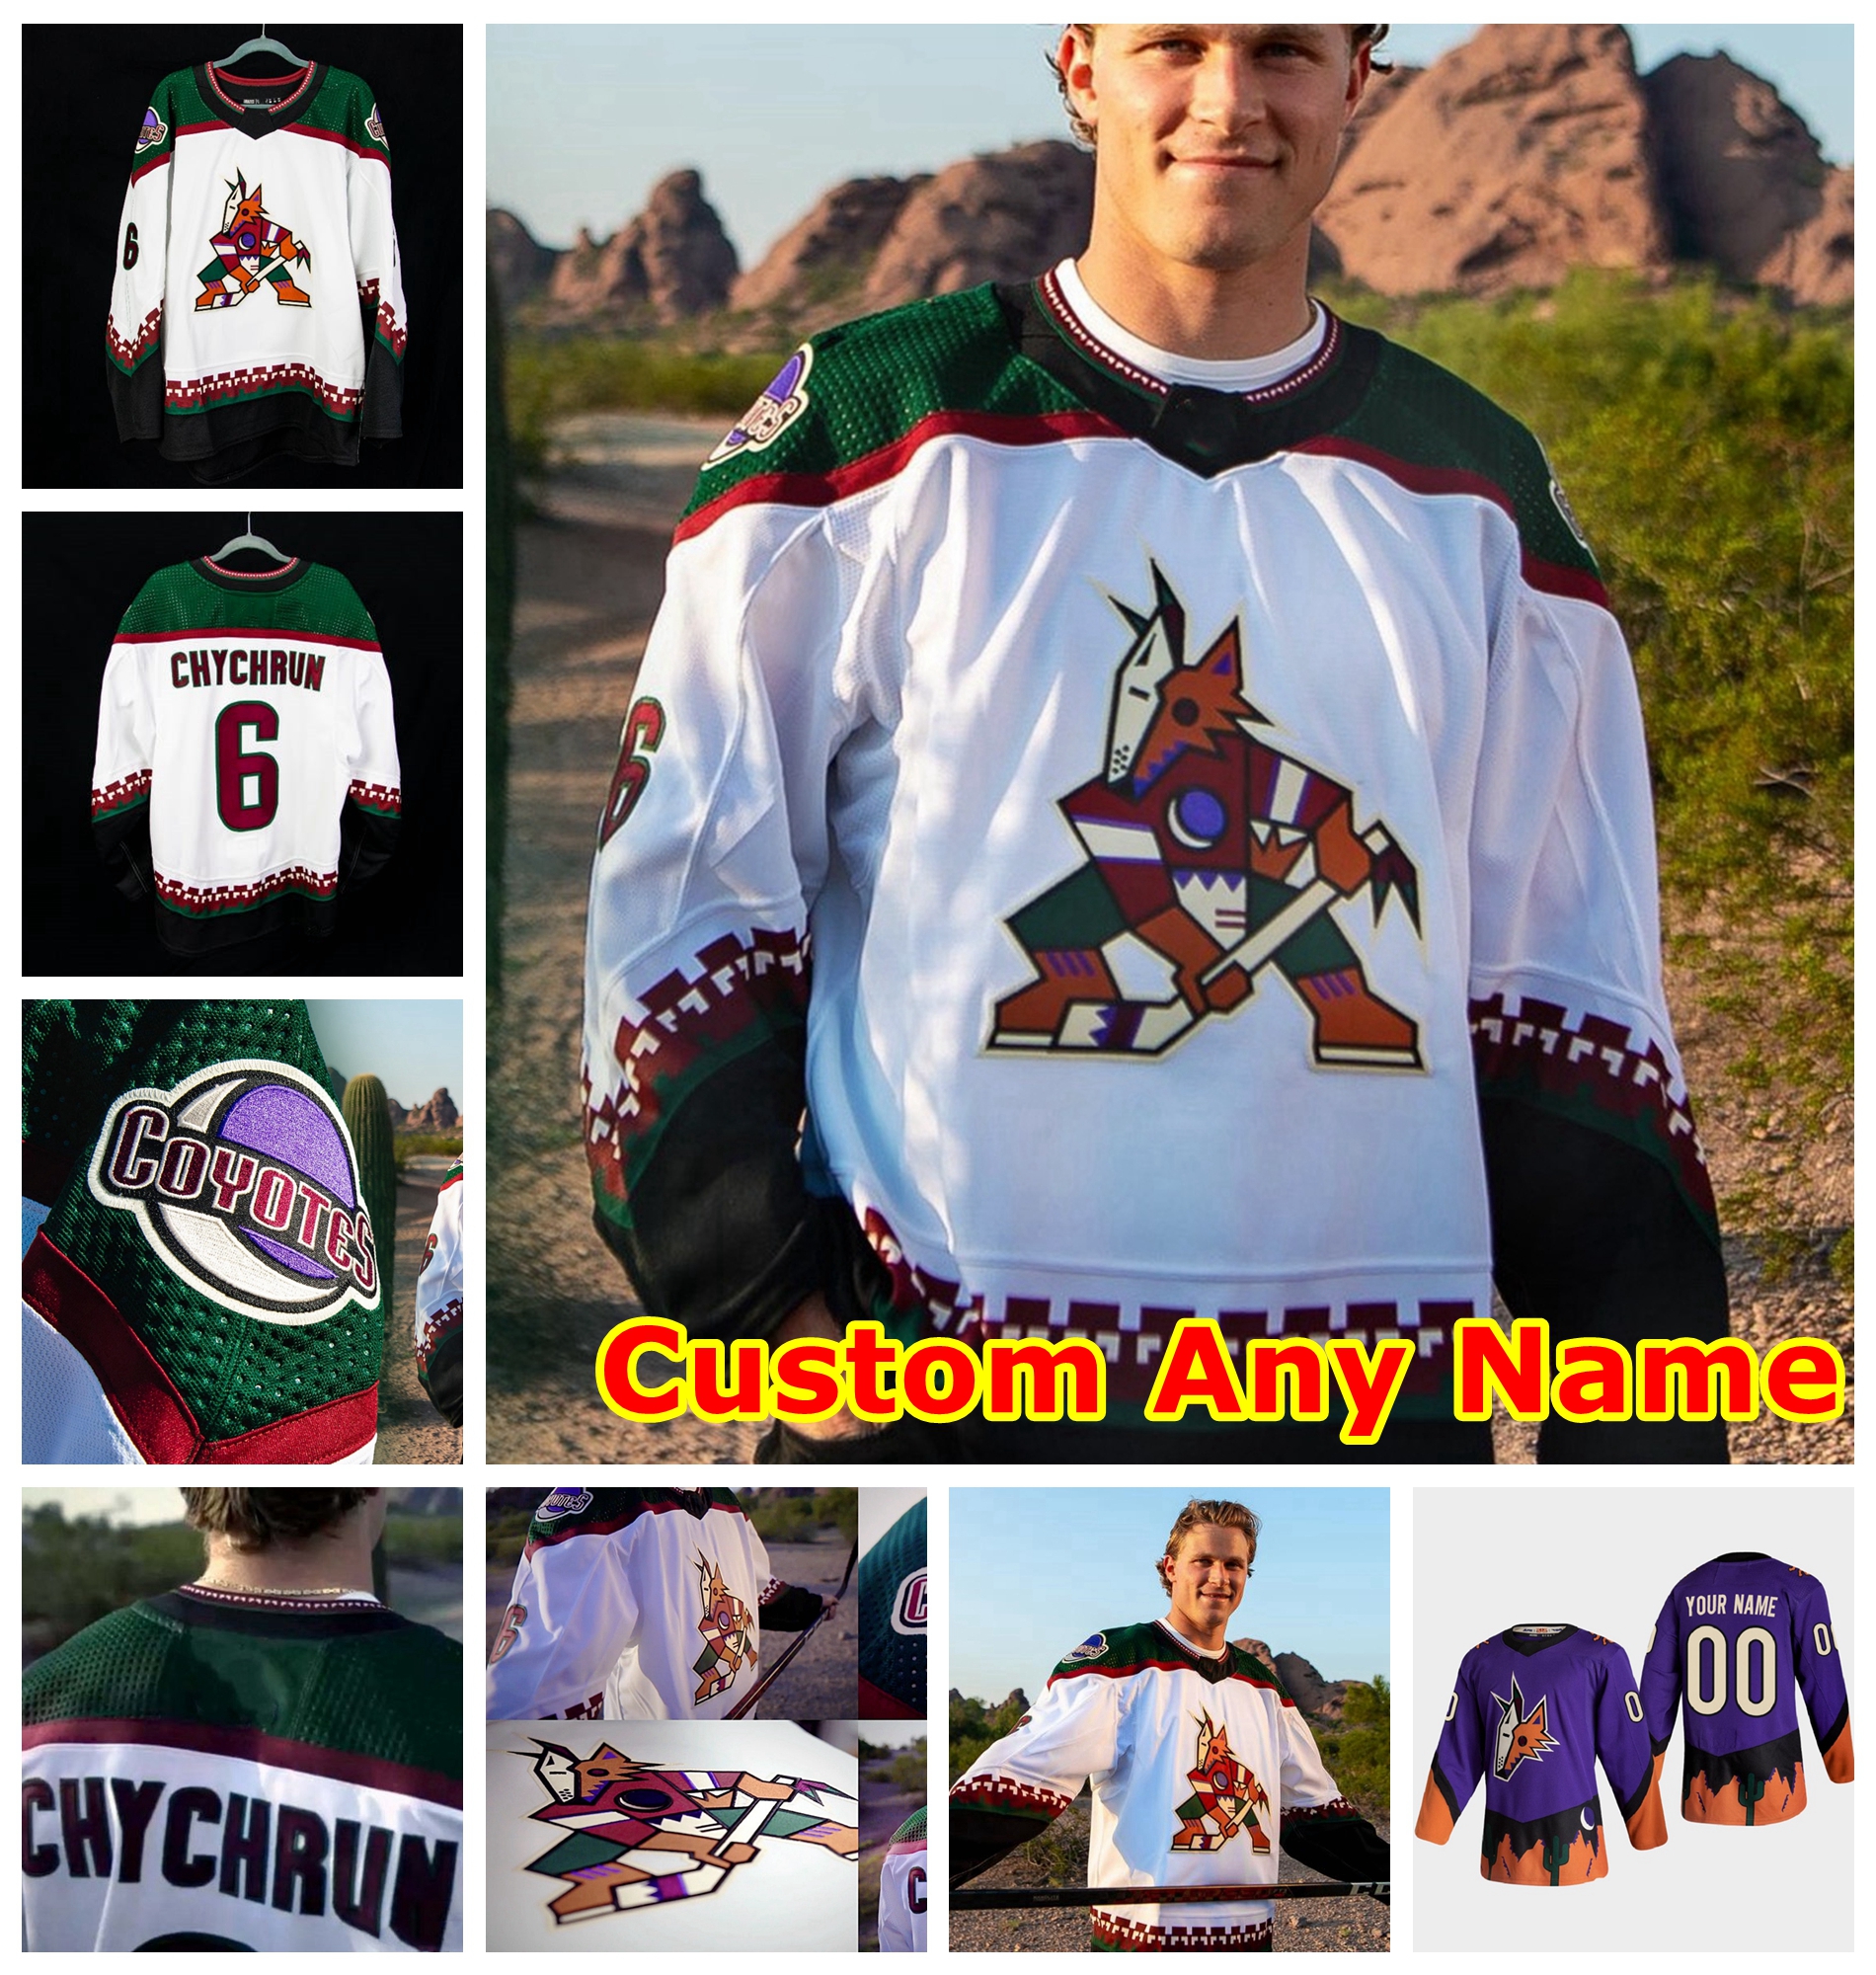 

Arizona Coyotes 2022 Classic Road White Jersey Jakob Chychrun Jersey Conor Garland Nick Schmaltz Phil Kessel Andrew Ladd Oliver Ekman-Larsson Custom Stitched, Men white away